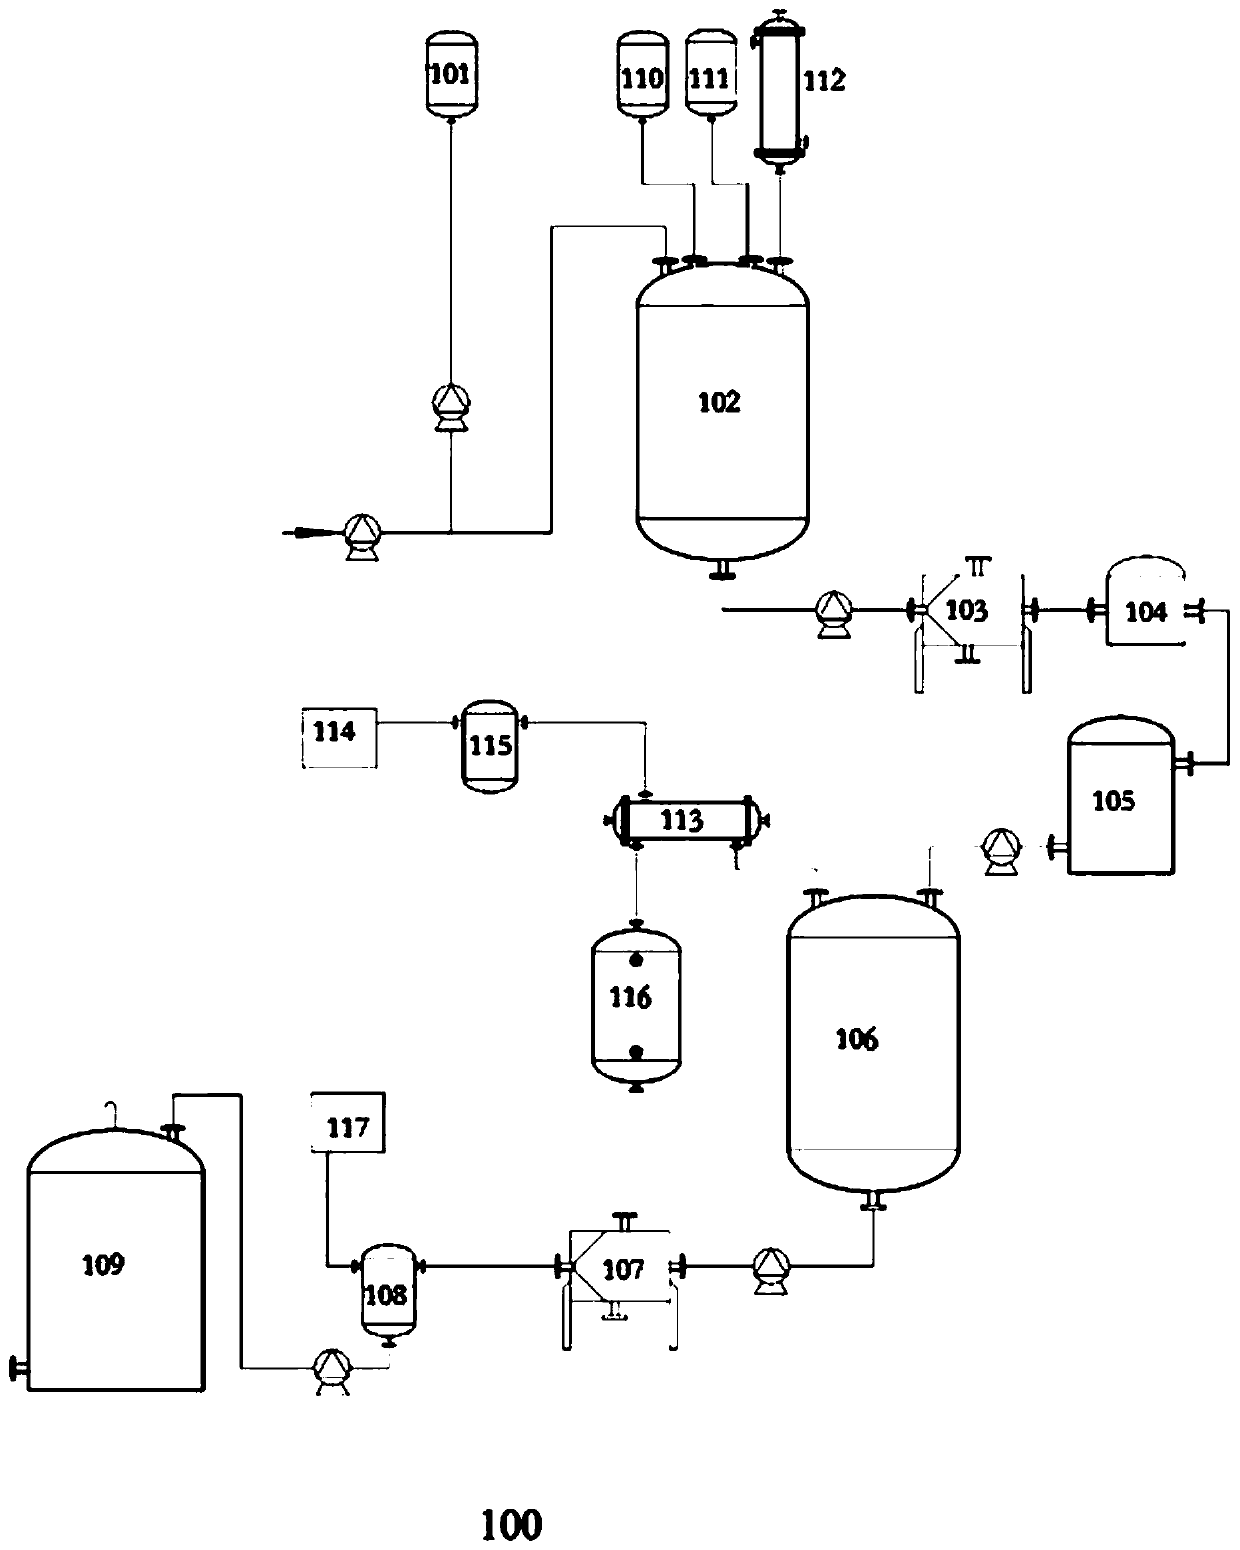 A biodiesel production system